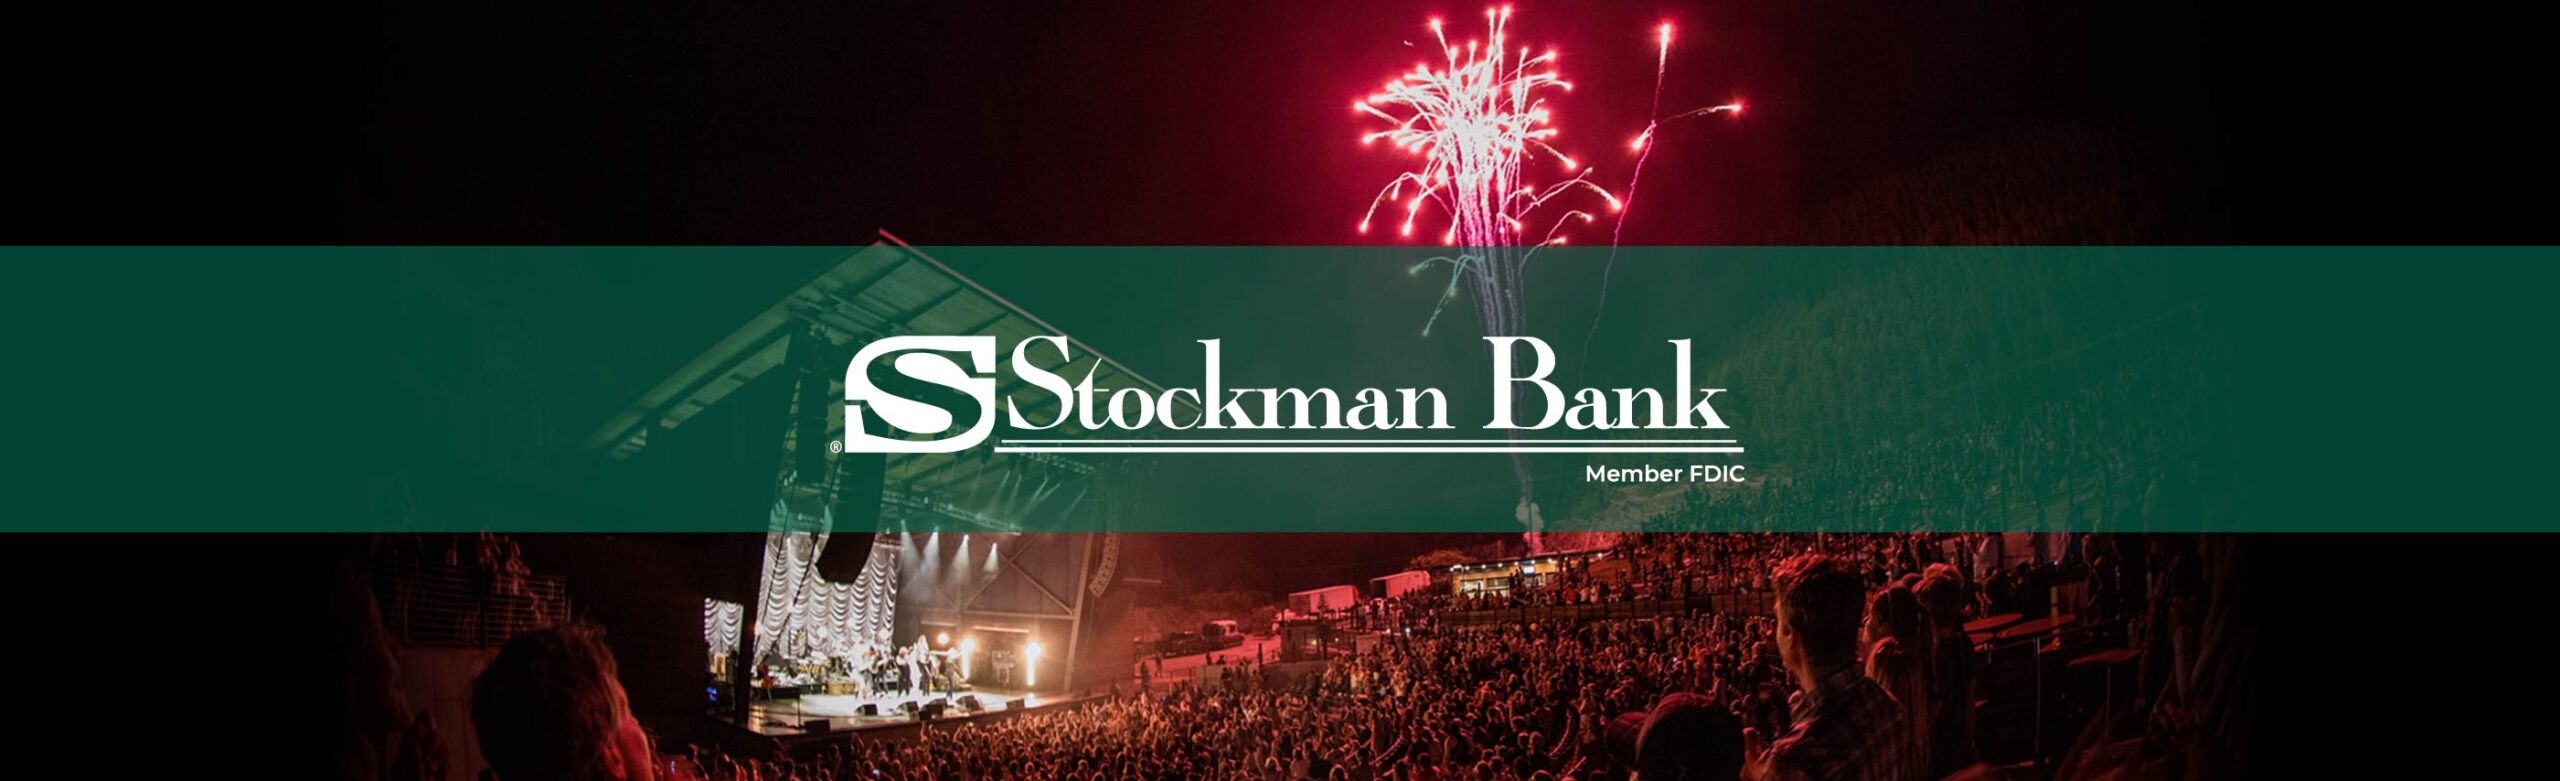 Stockman Bank to Host Fourth of July Fireworks Show During Jason Isbell Concert at KettleHouse Amphitheater Image